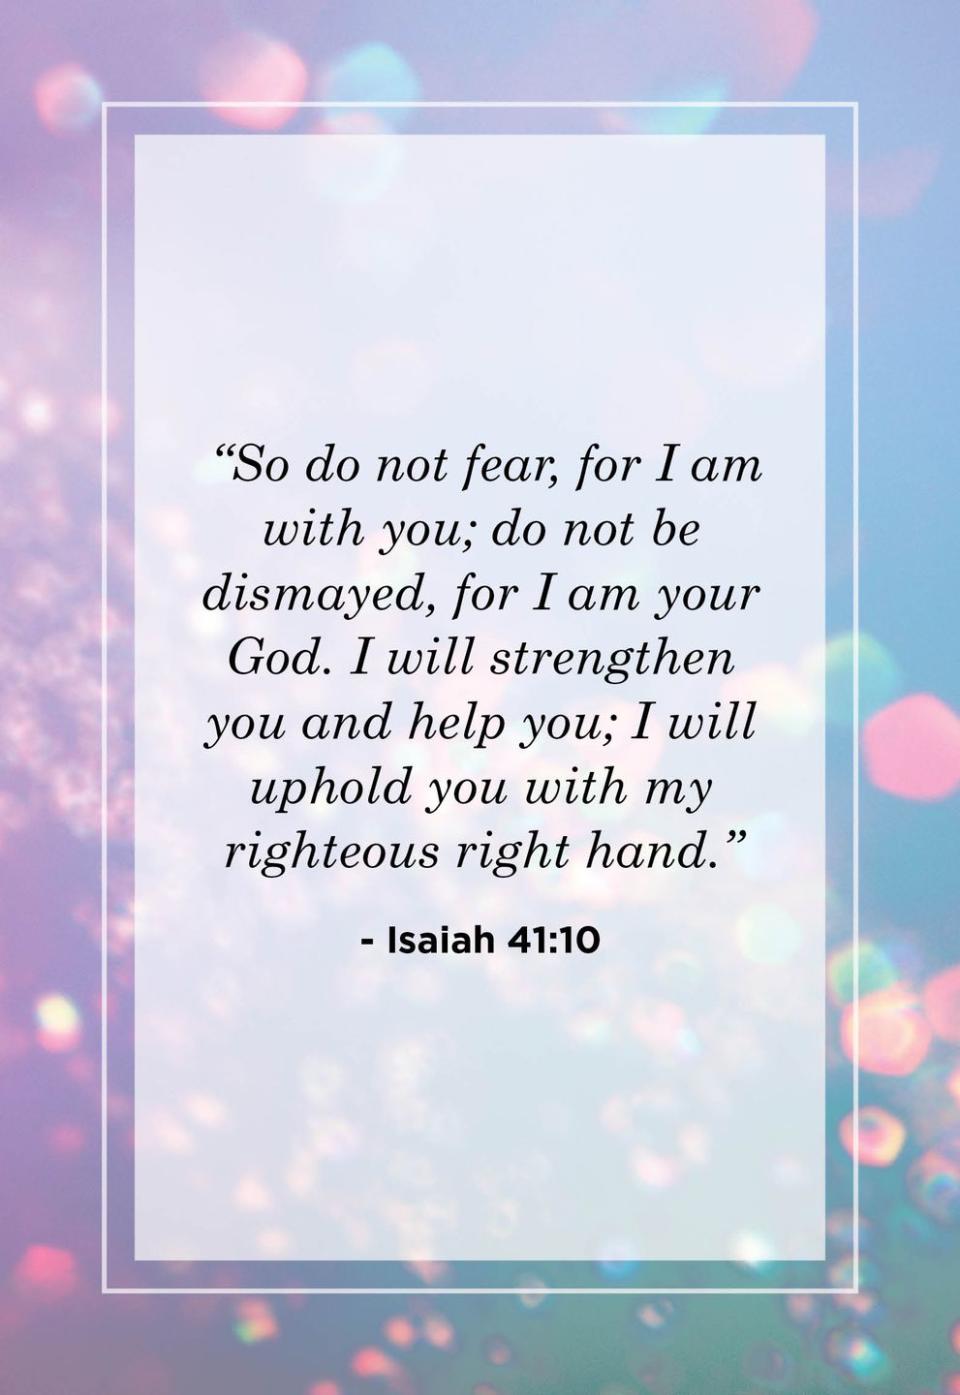 <p>"So do not fear, for I am with you; do not be dismayed, for I am your God. I will strengthen you and help you; I will uphold you with my righteous right hand."</p>